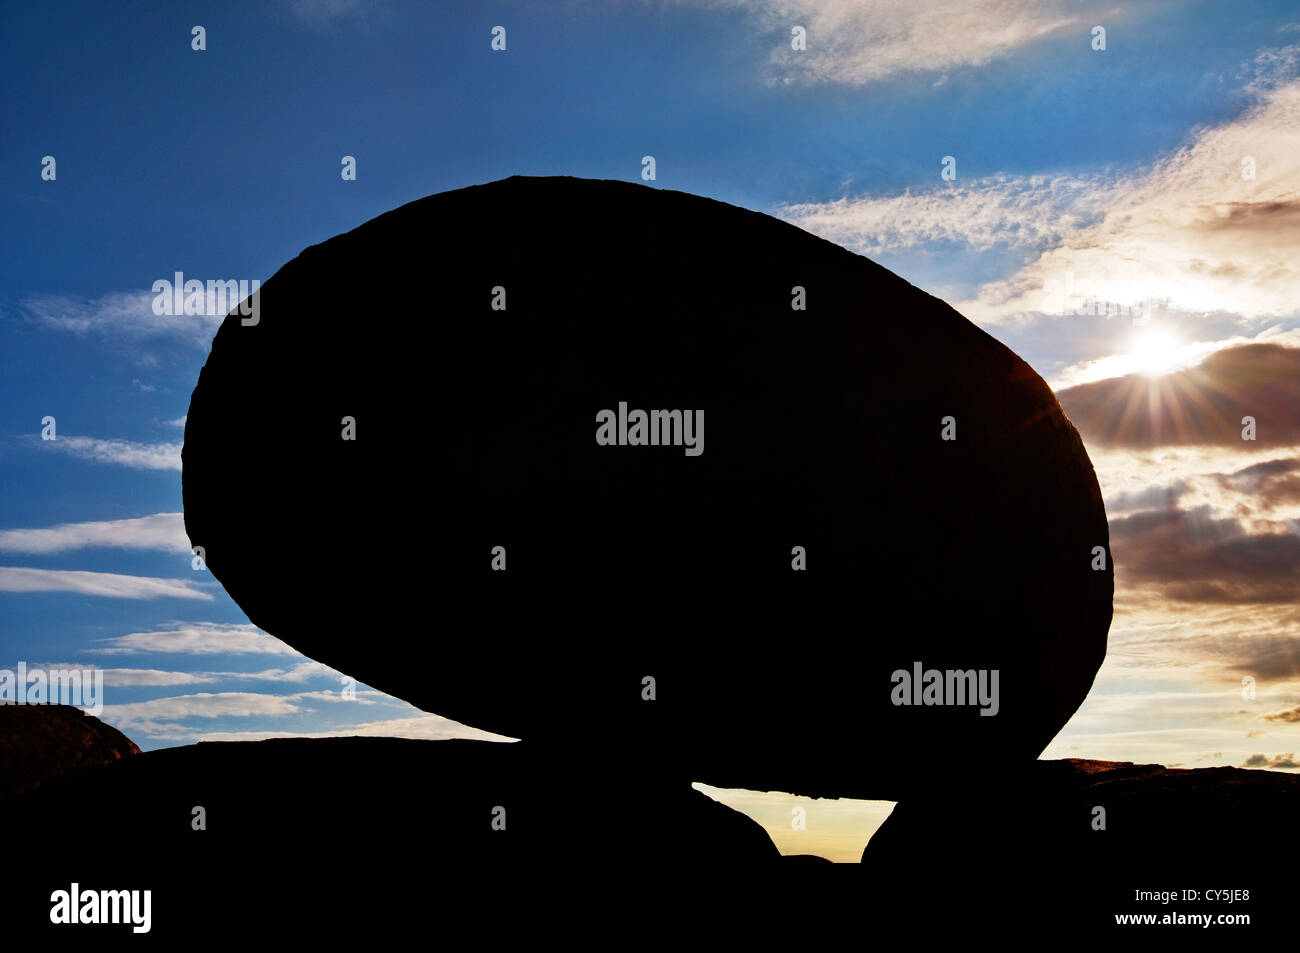 Black silhouette of Devils Marbles in front of the sun. Stock Photo